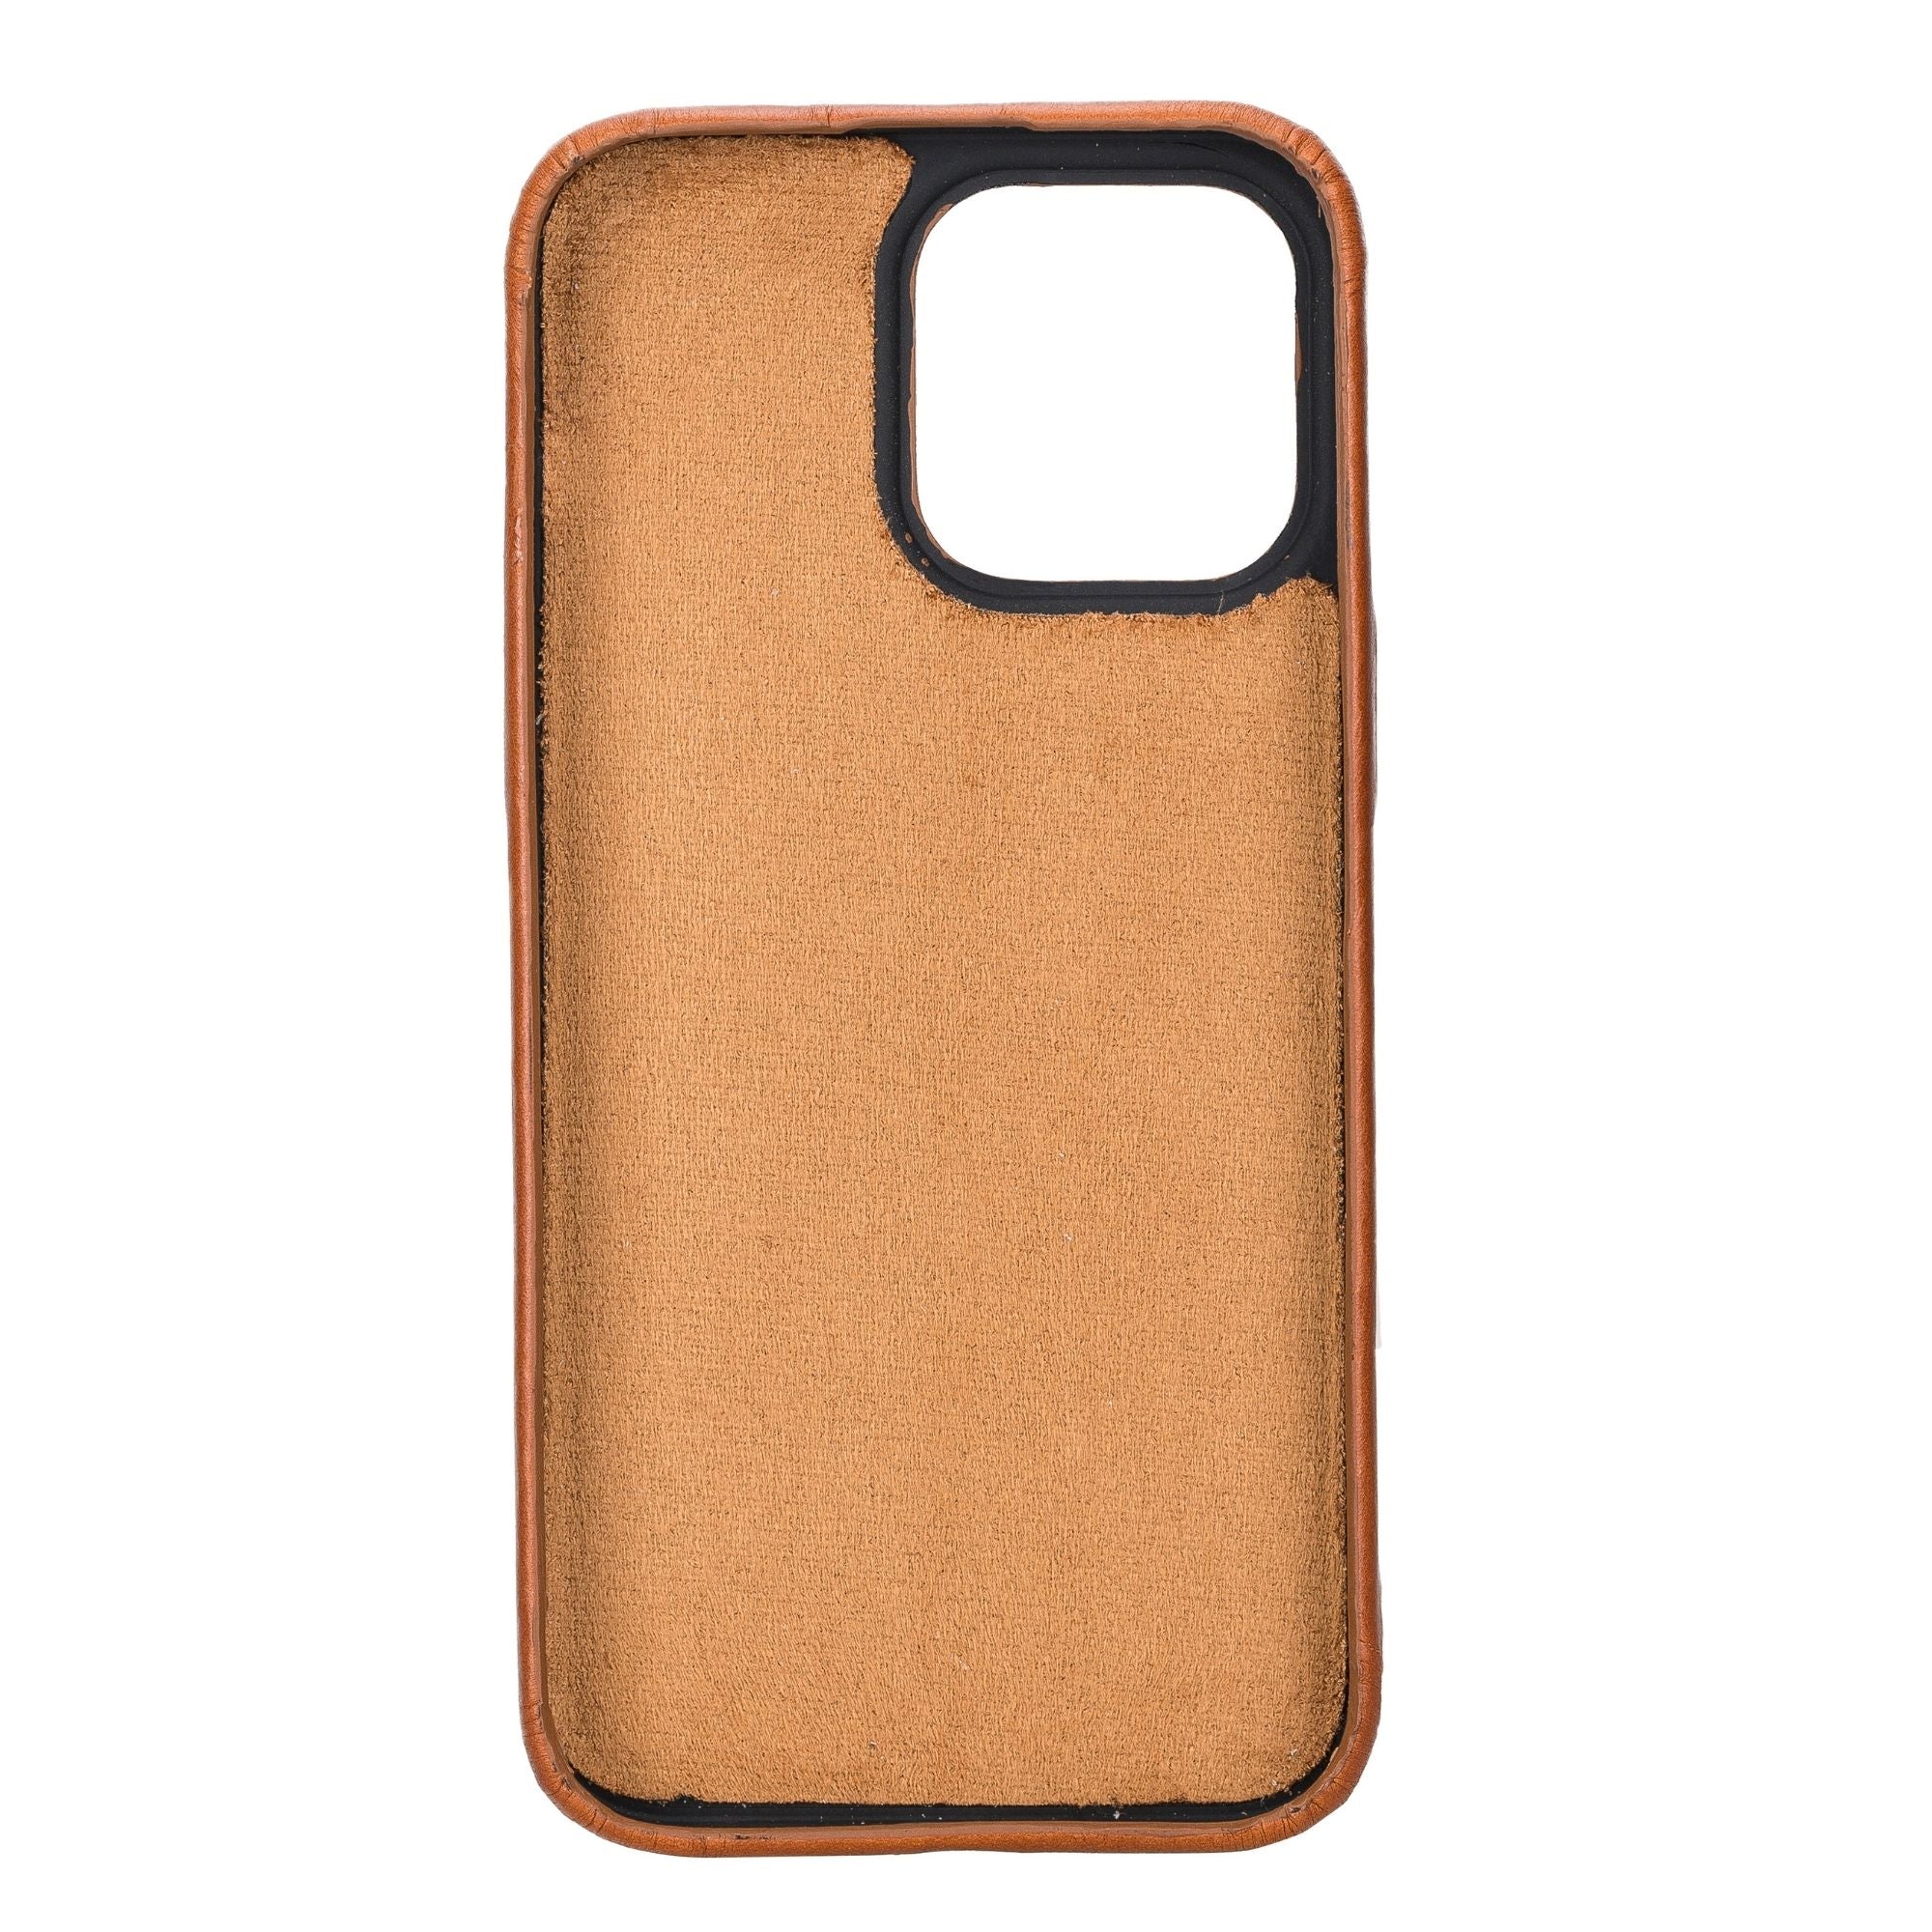 MagSafe Snap-On Leather Case for iPhone 12 Mini | BlackBrook